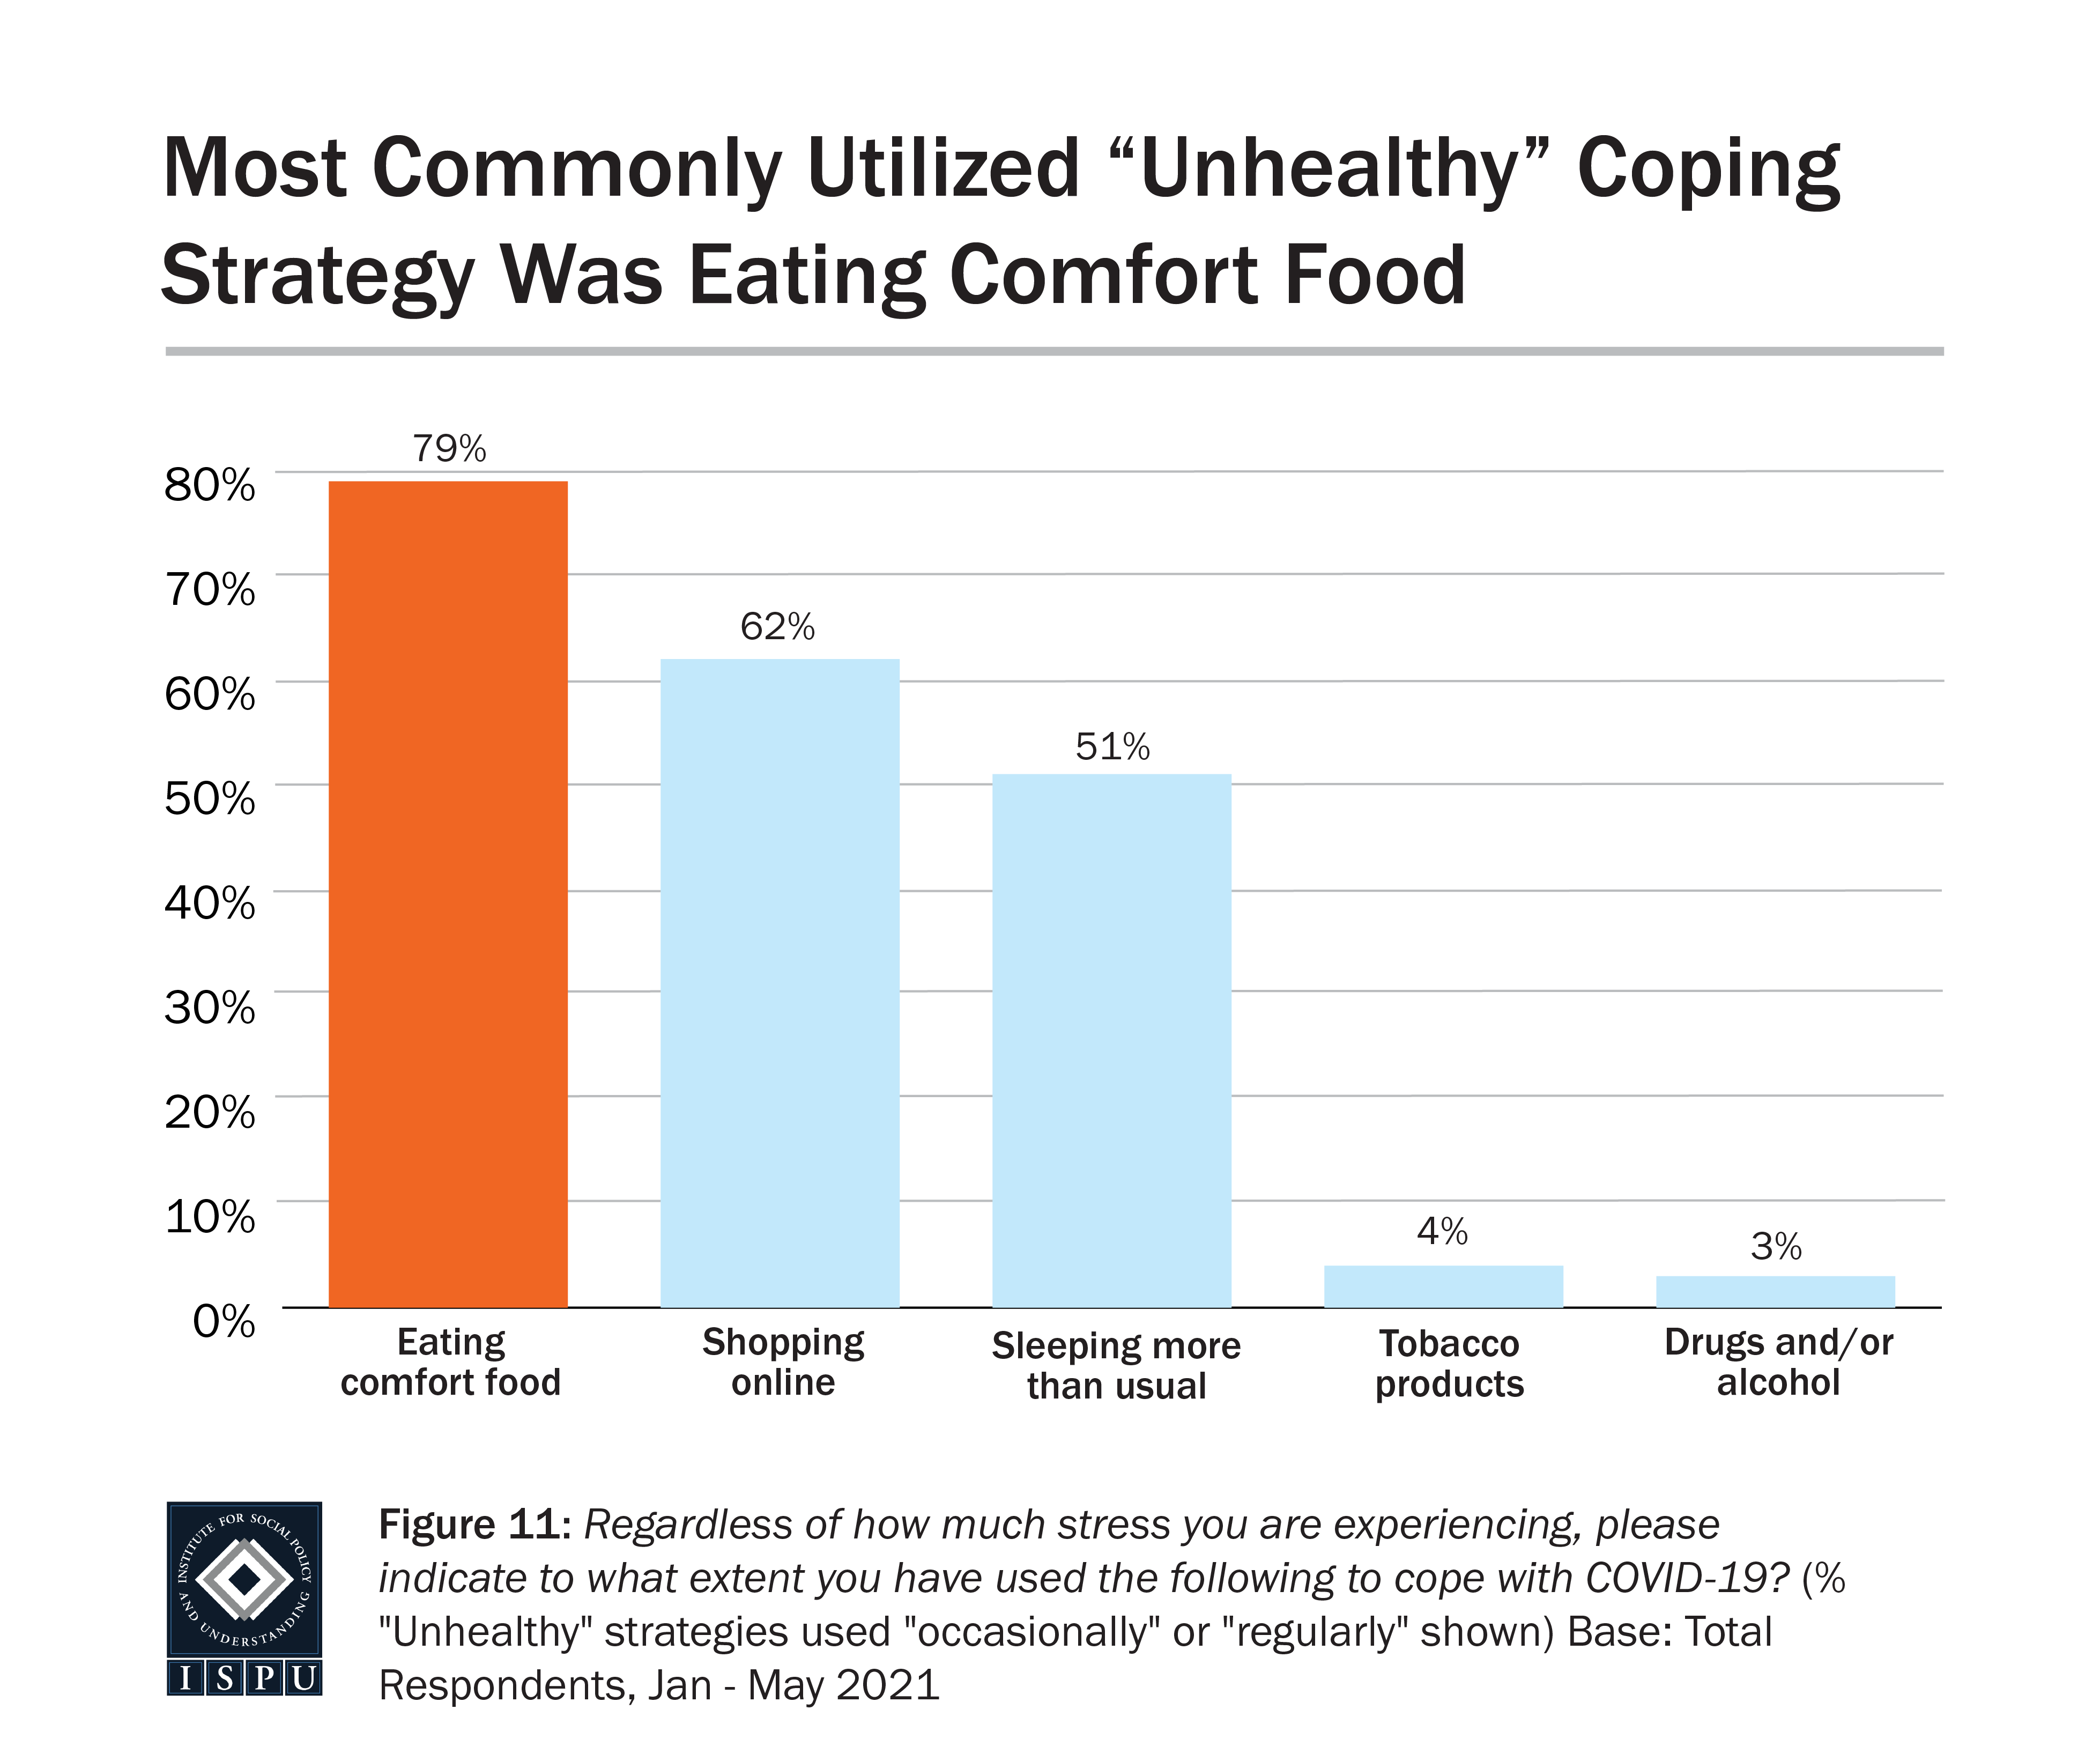 Graph displaying: bar graph representing "unhealthy" coping habits, with highest ranked being eating comfort food